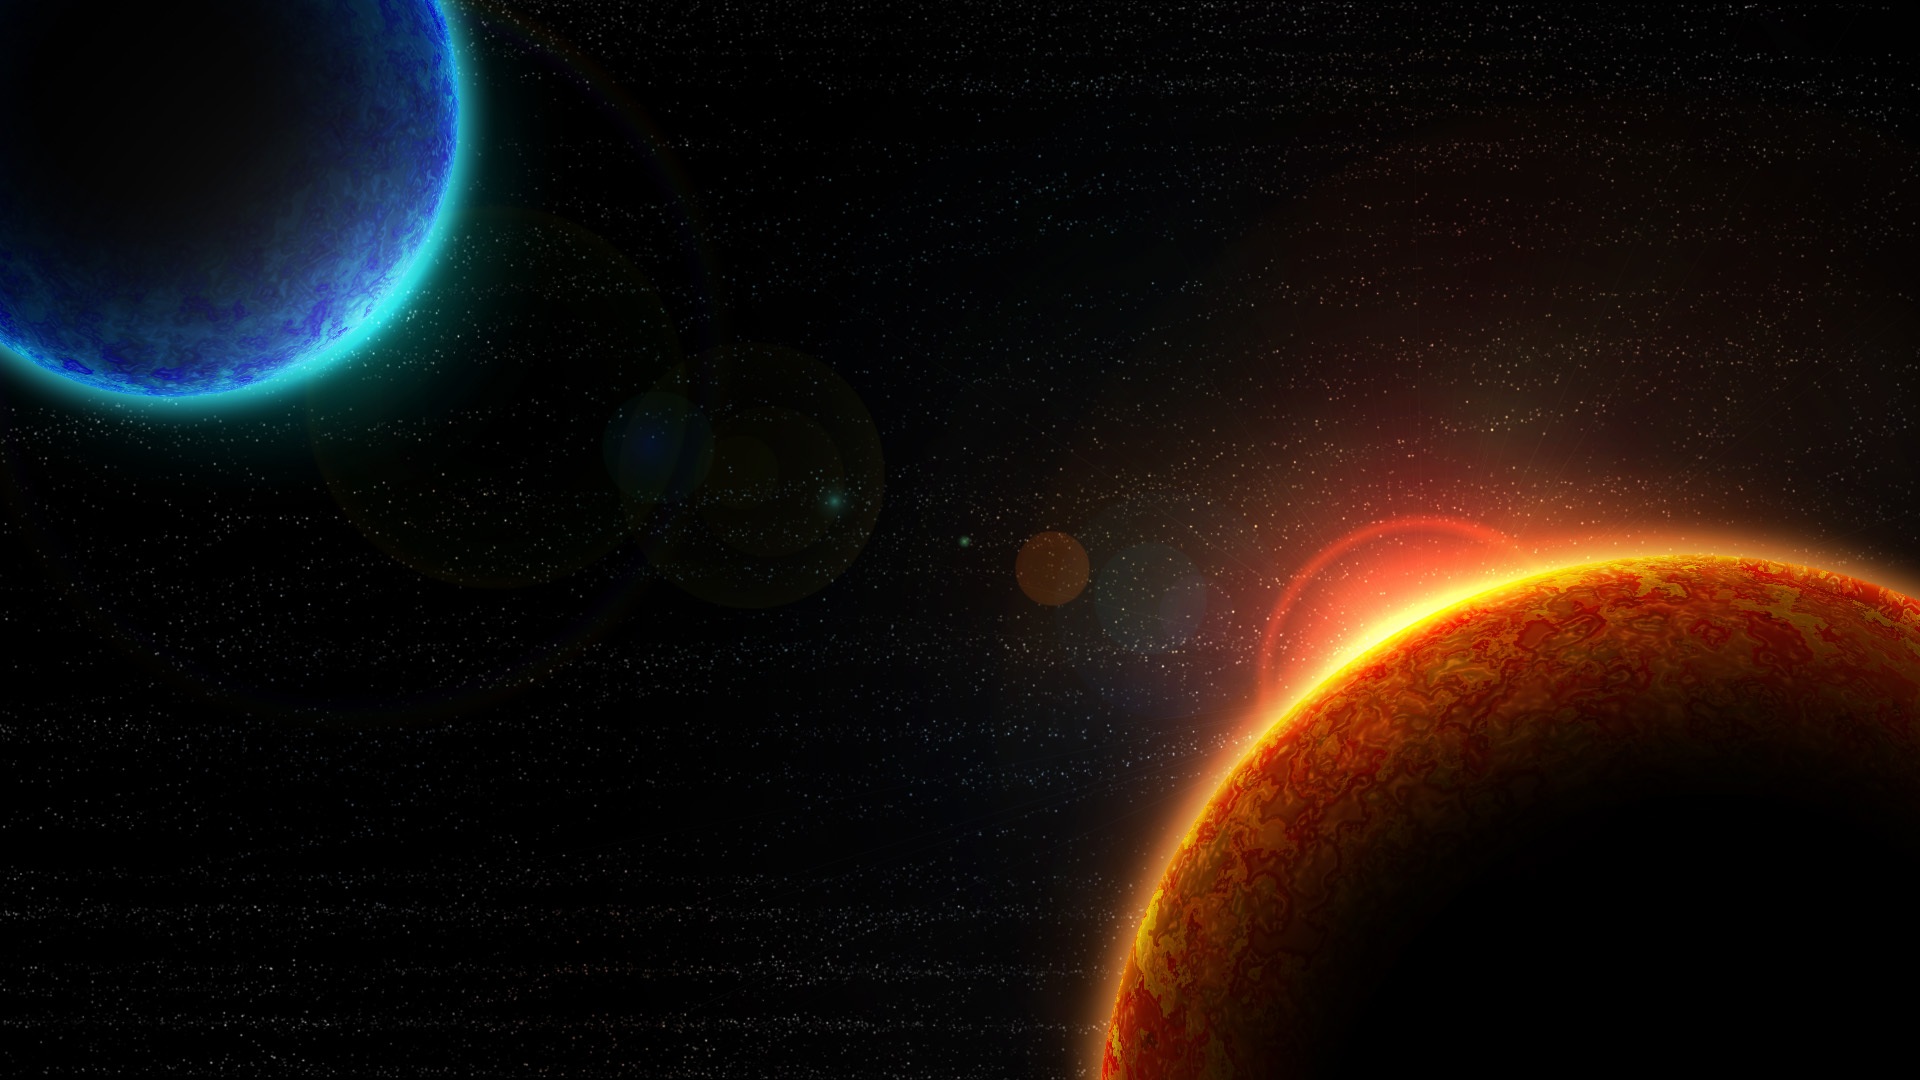 Red and blue planets on the black background of space